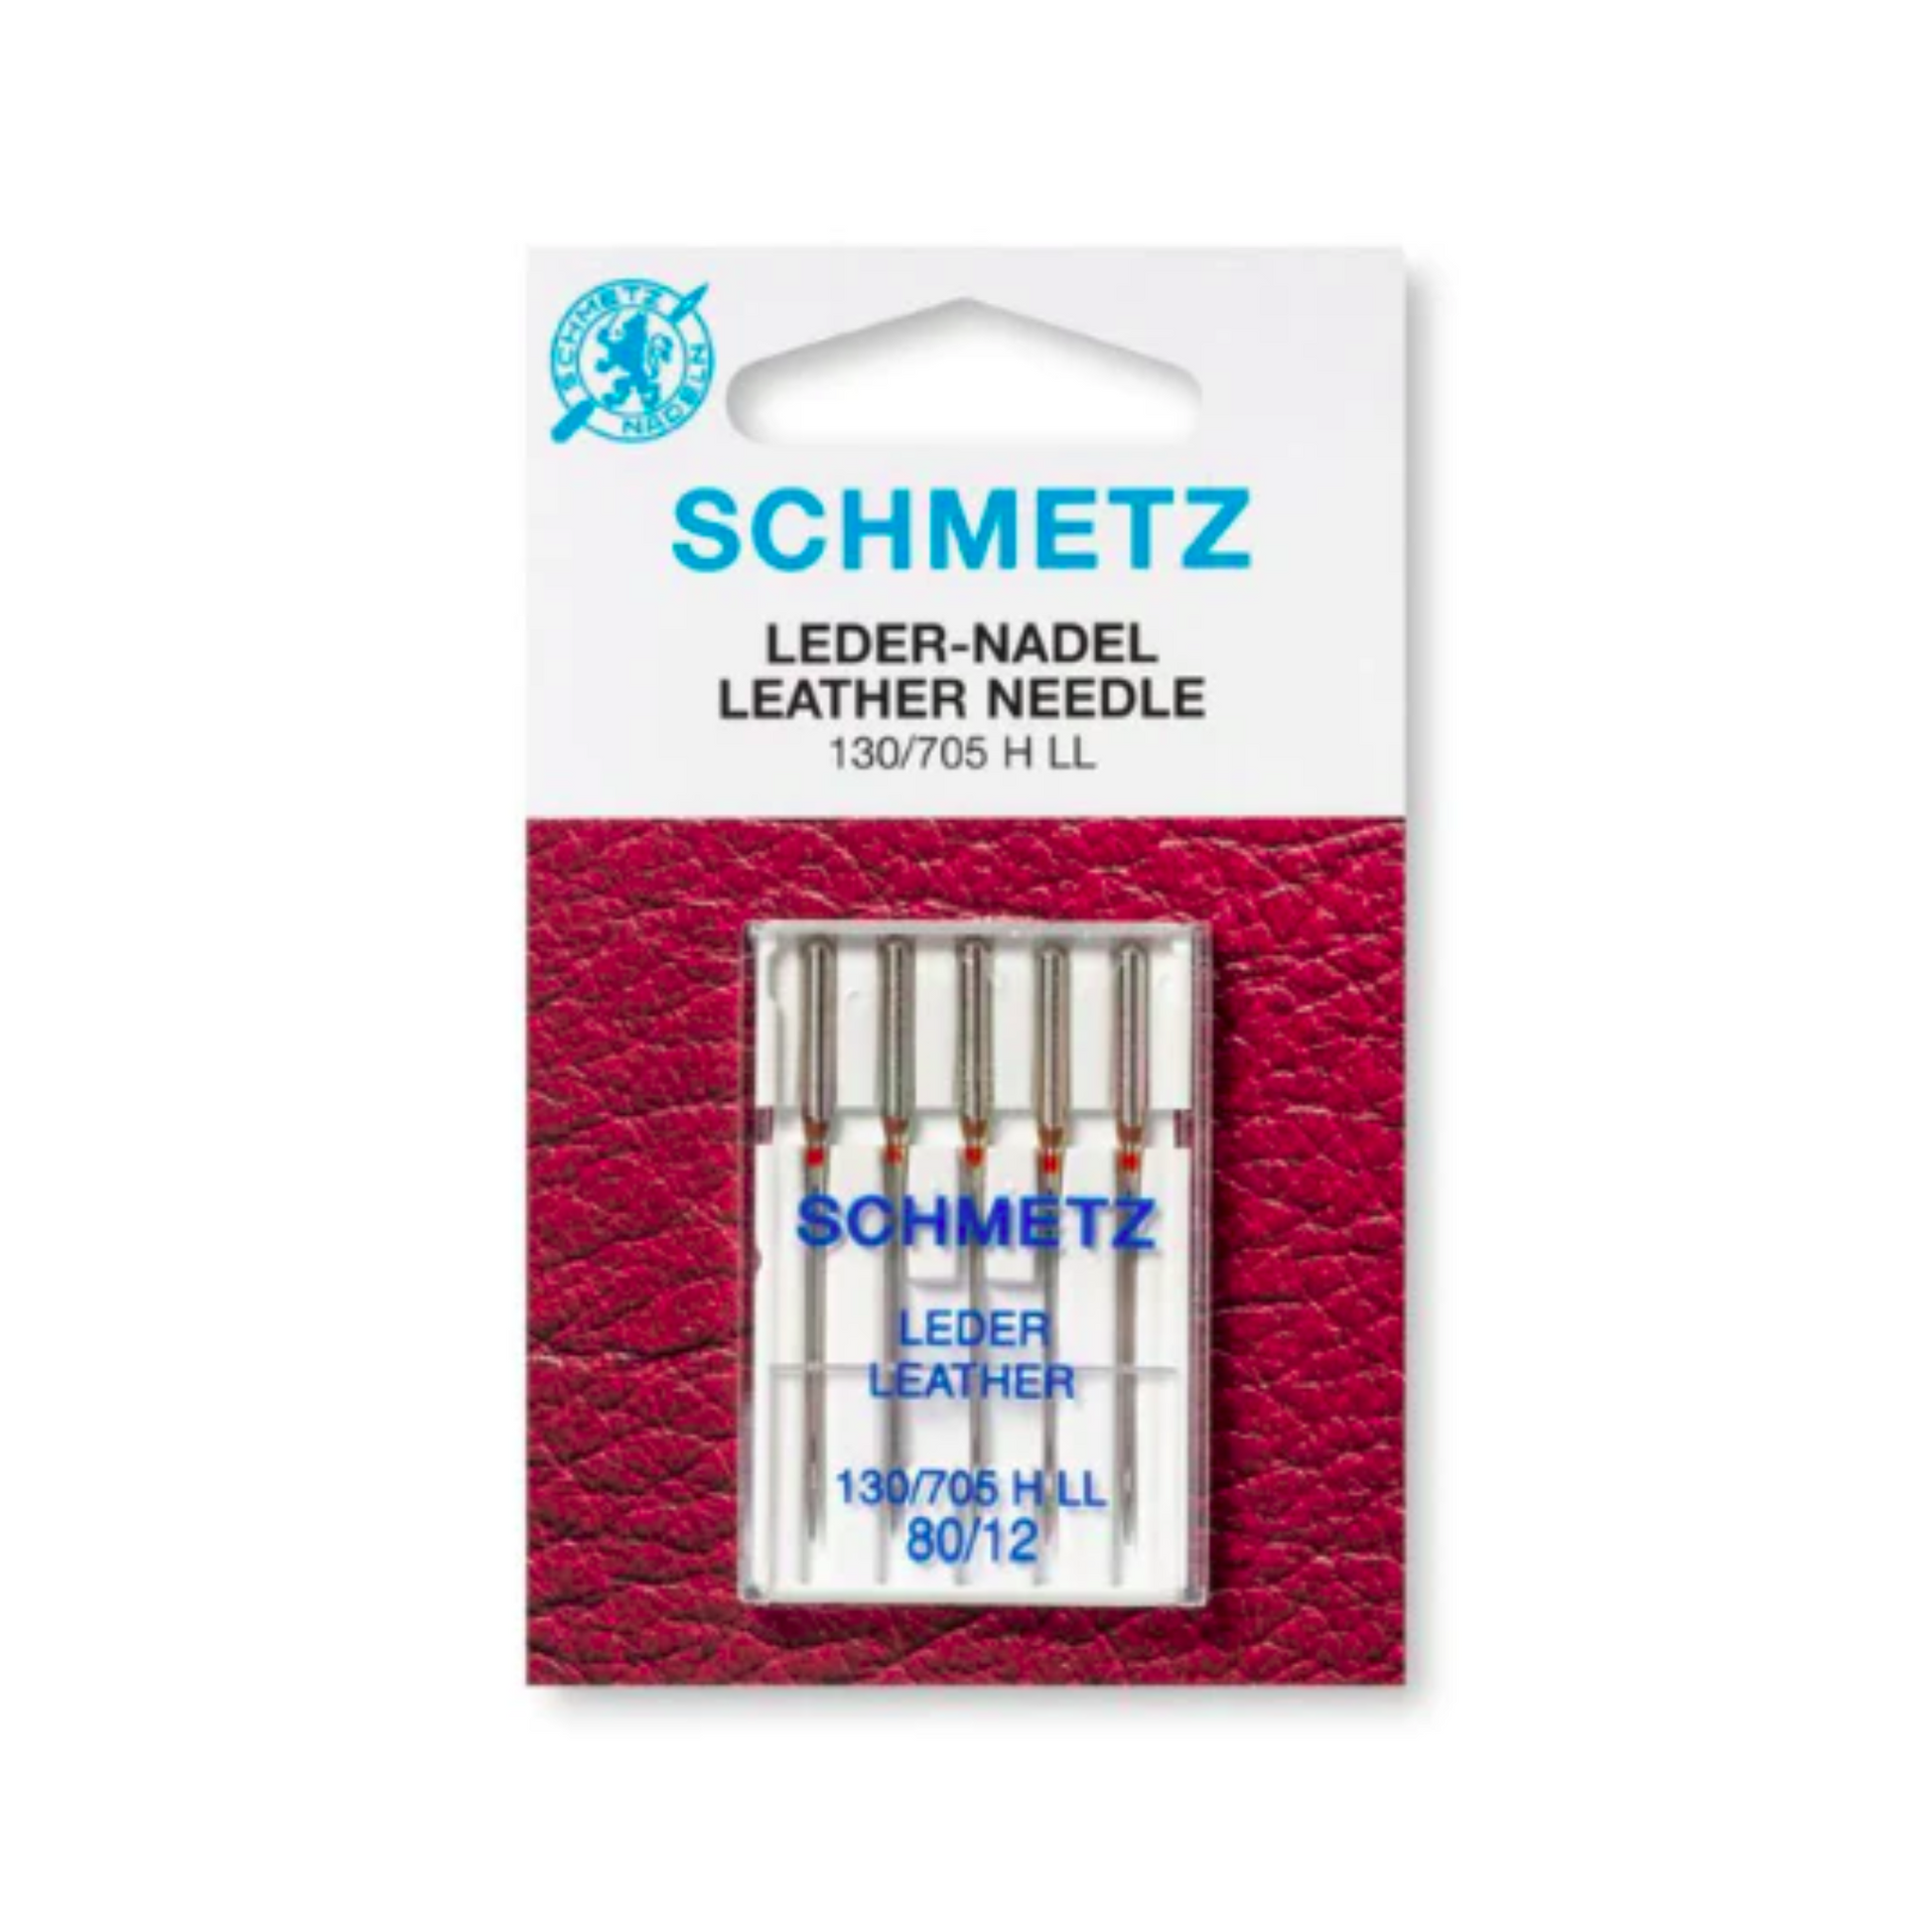 Schmetz - Leather needle - Sewing accessory - Silver - Front view